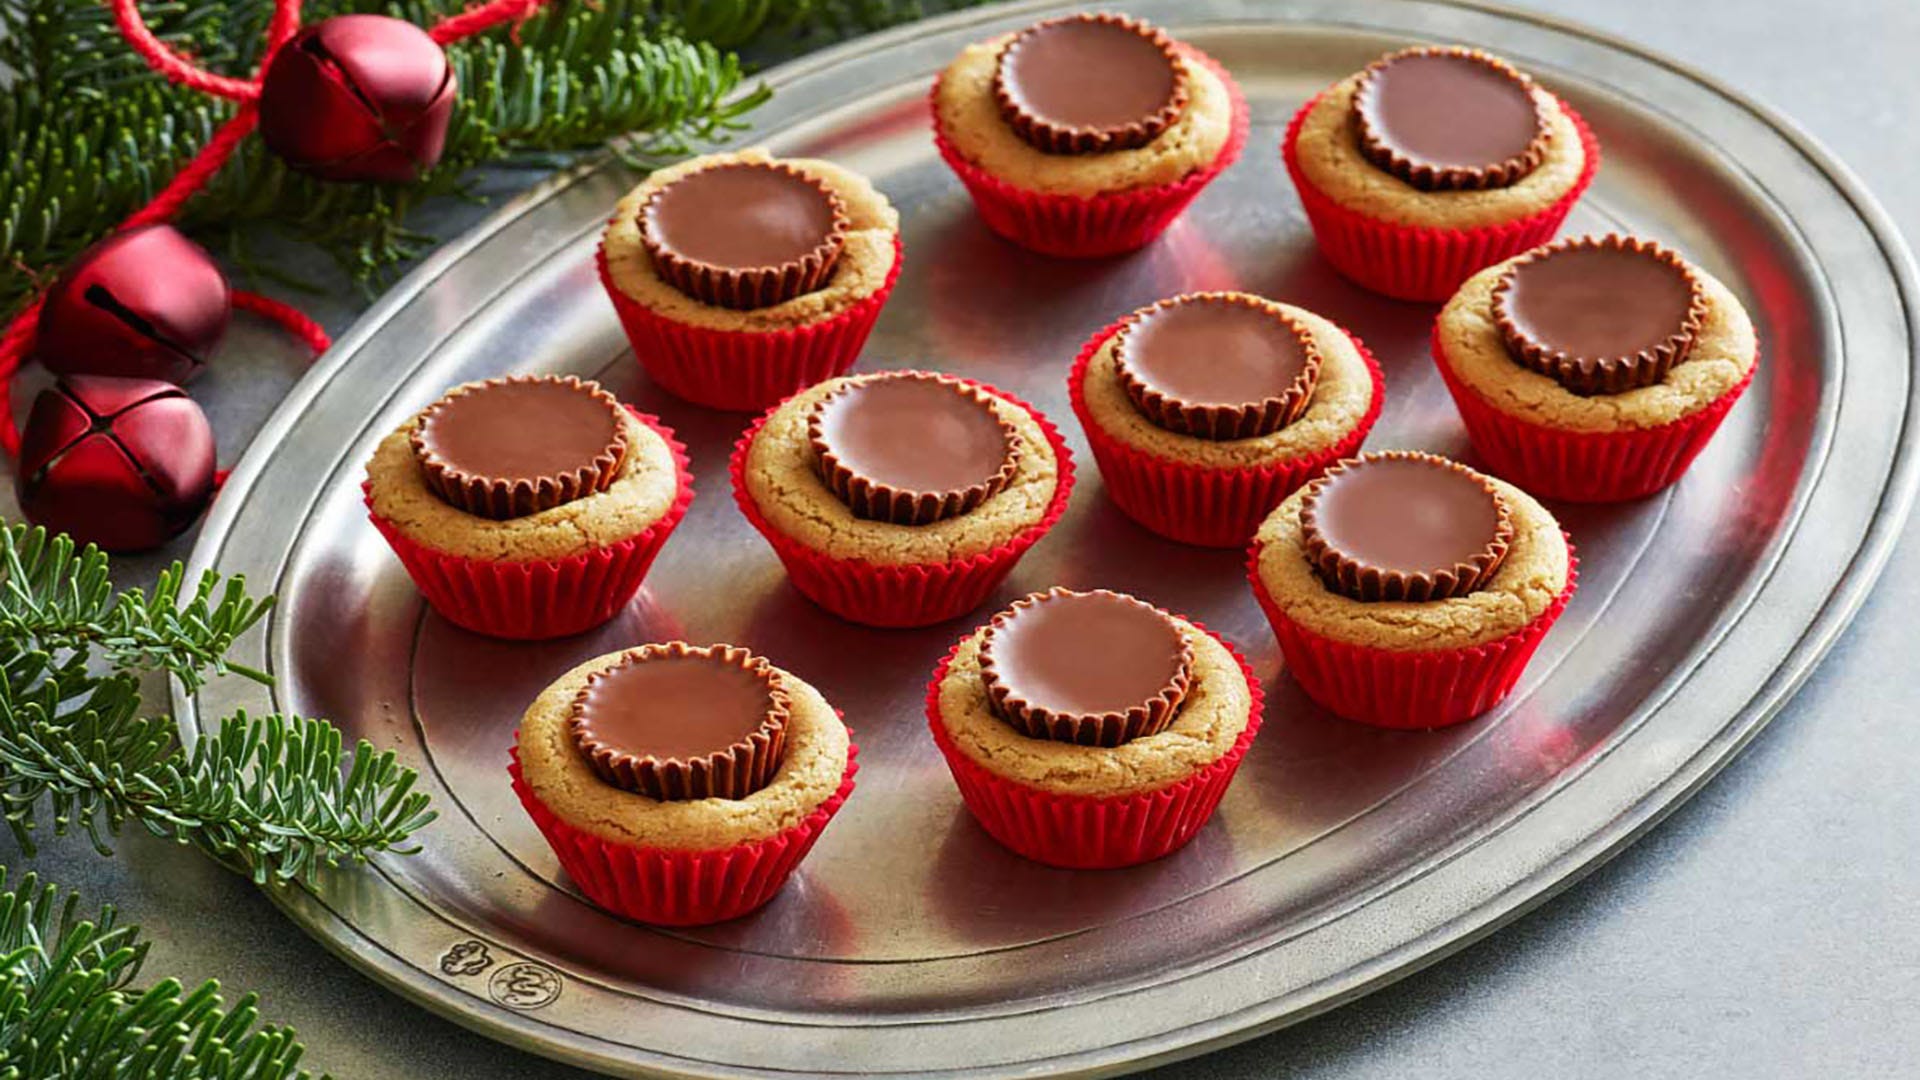 Reese's Peanut Butter Cups (36 x 42 Gr.) - Five Star Trading Holland